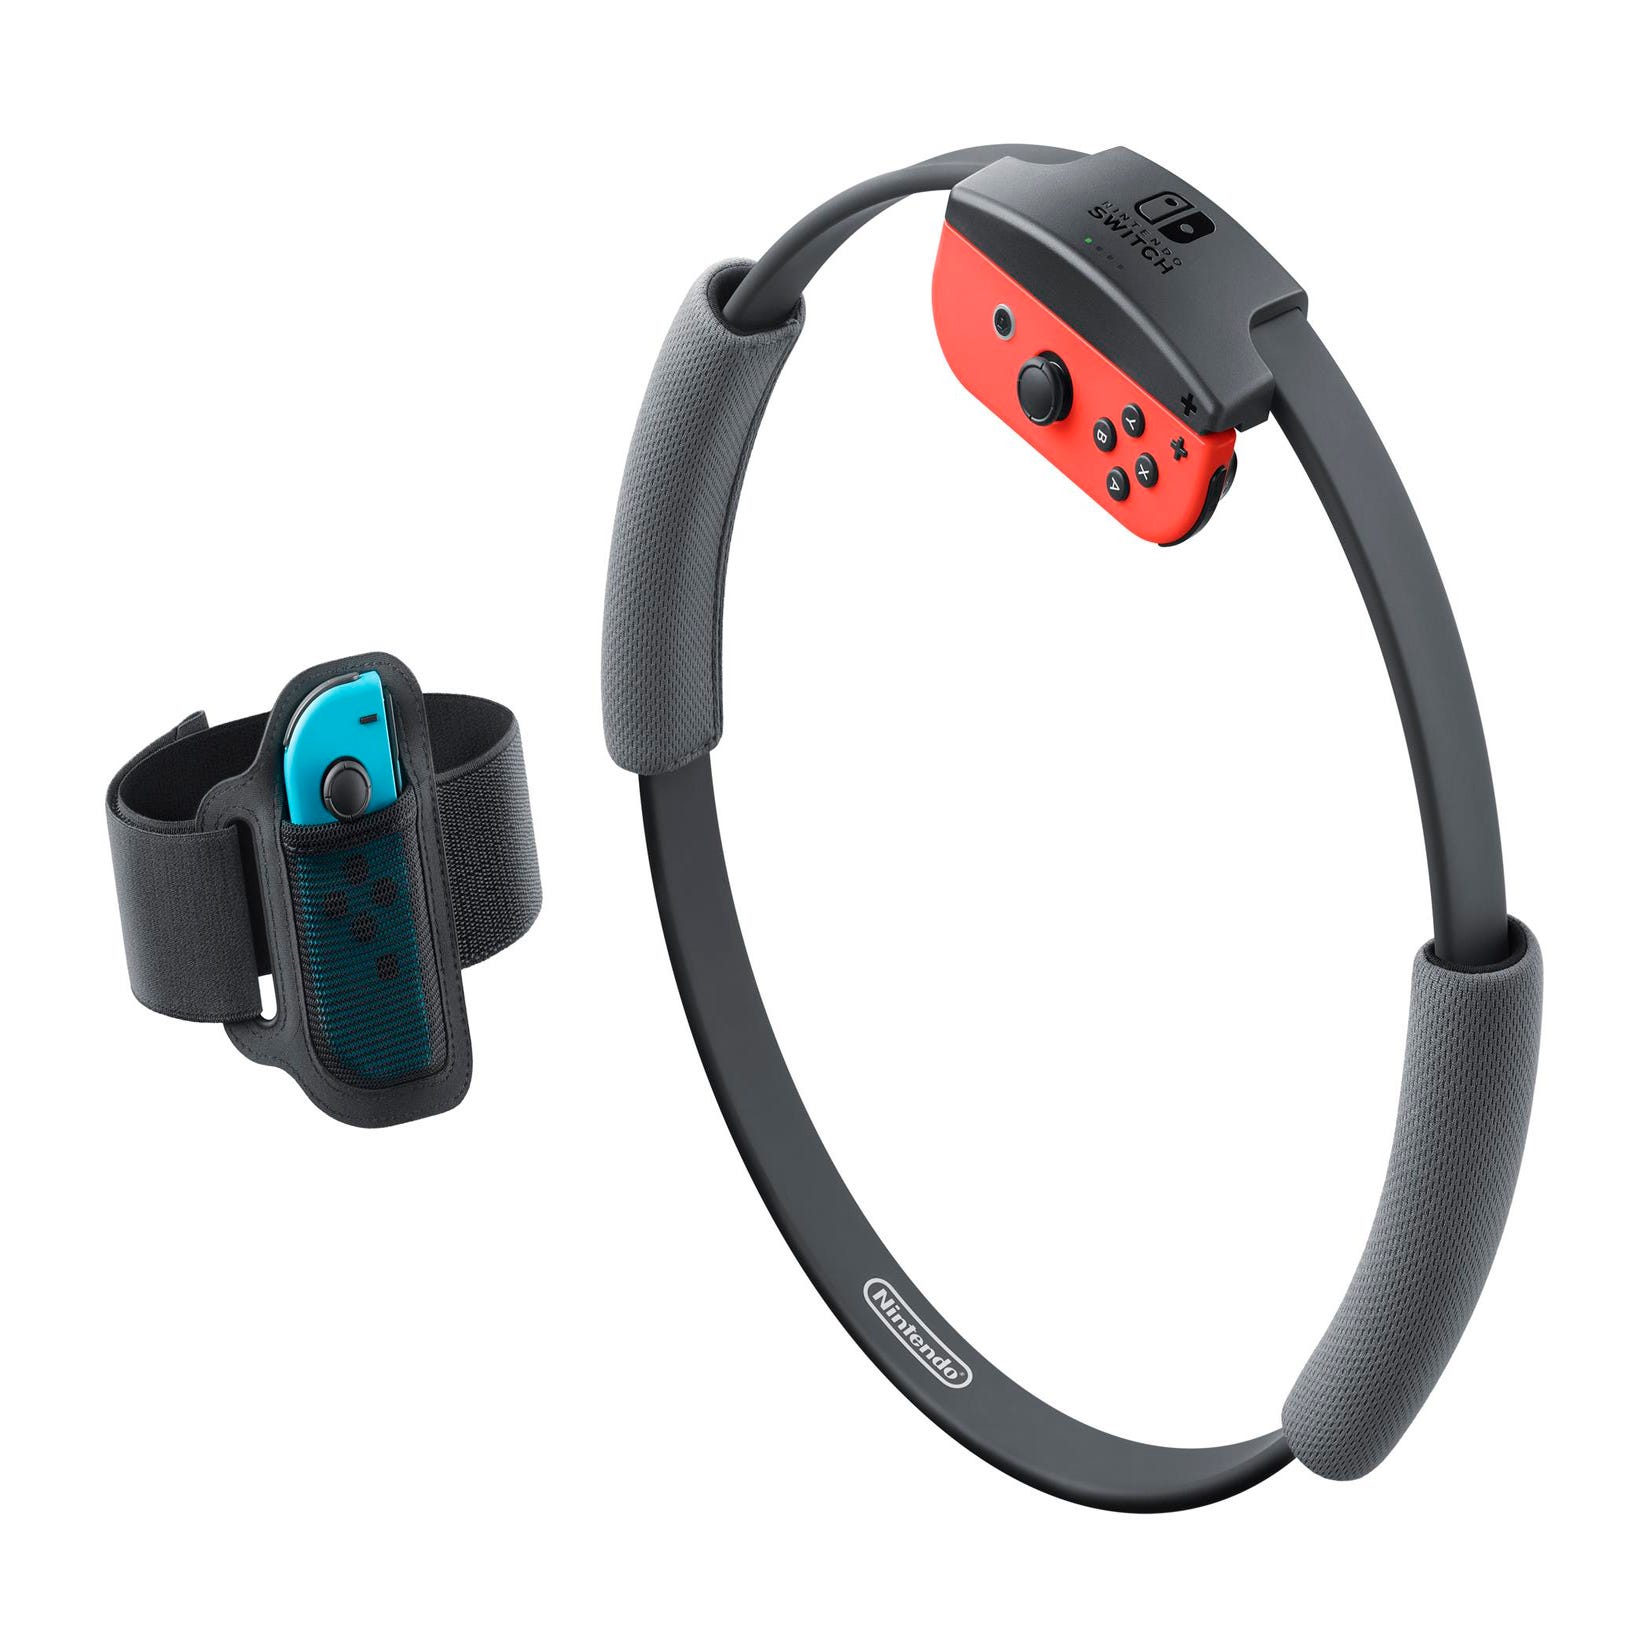 Ring Fit Adventure is the Nintendo Switch's new fitness experience